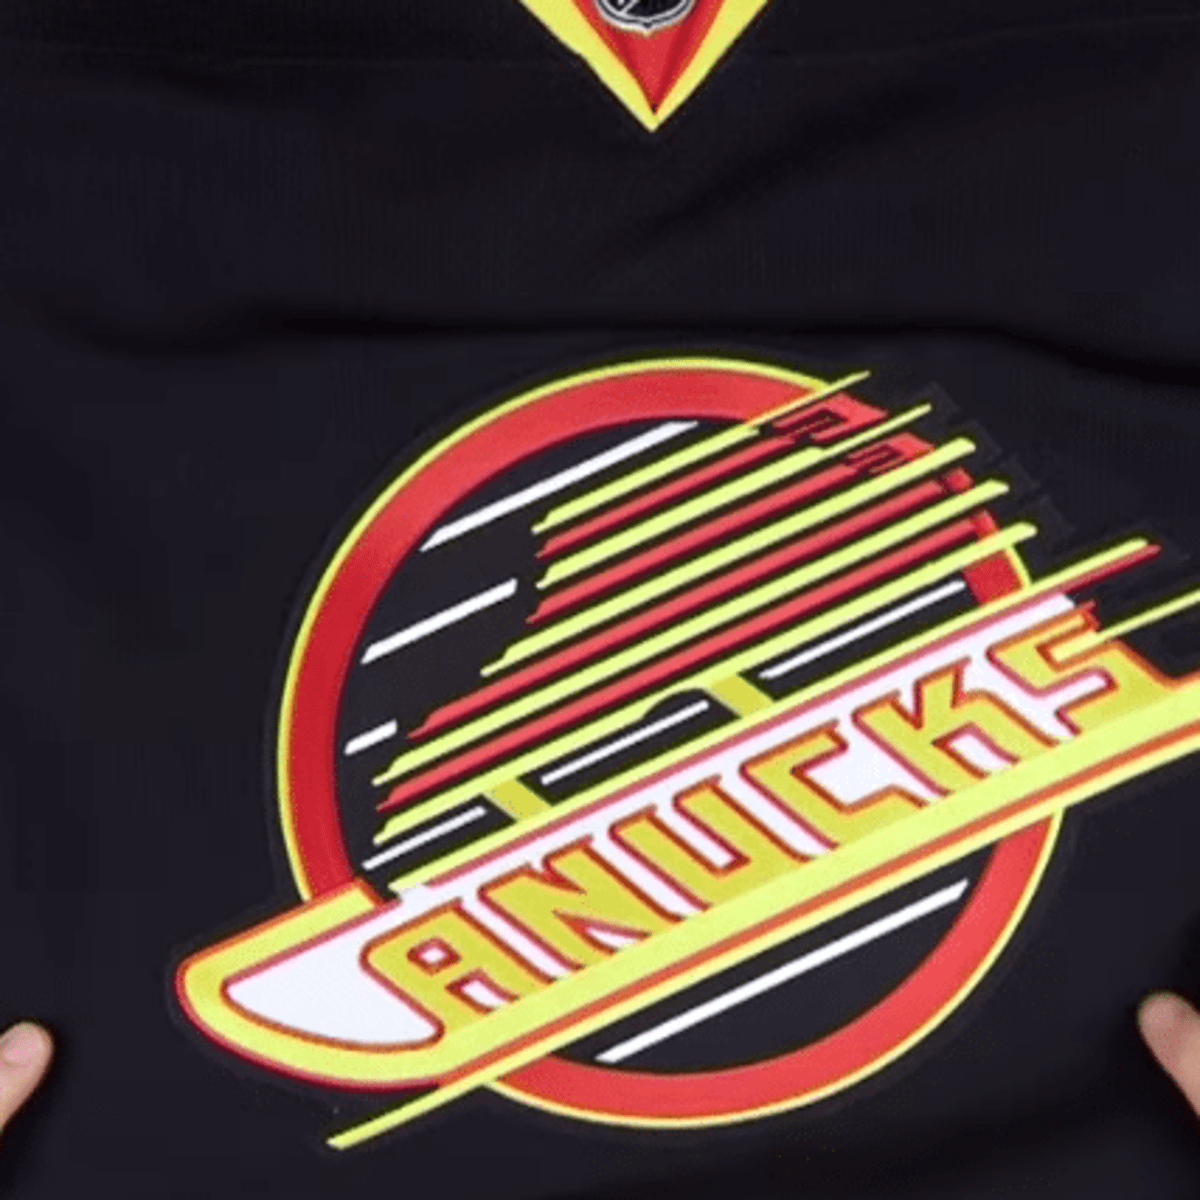 Should the Canucks make the Flying Skate throwbacks a full-time look?